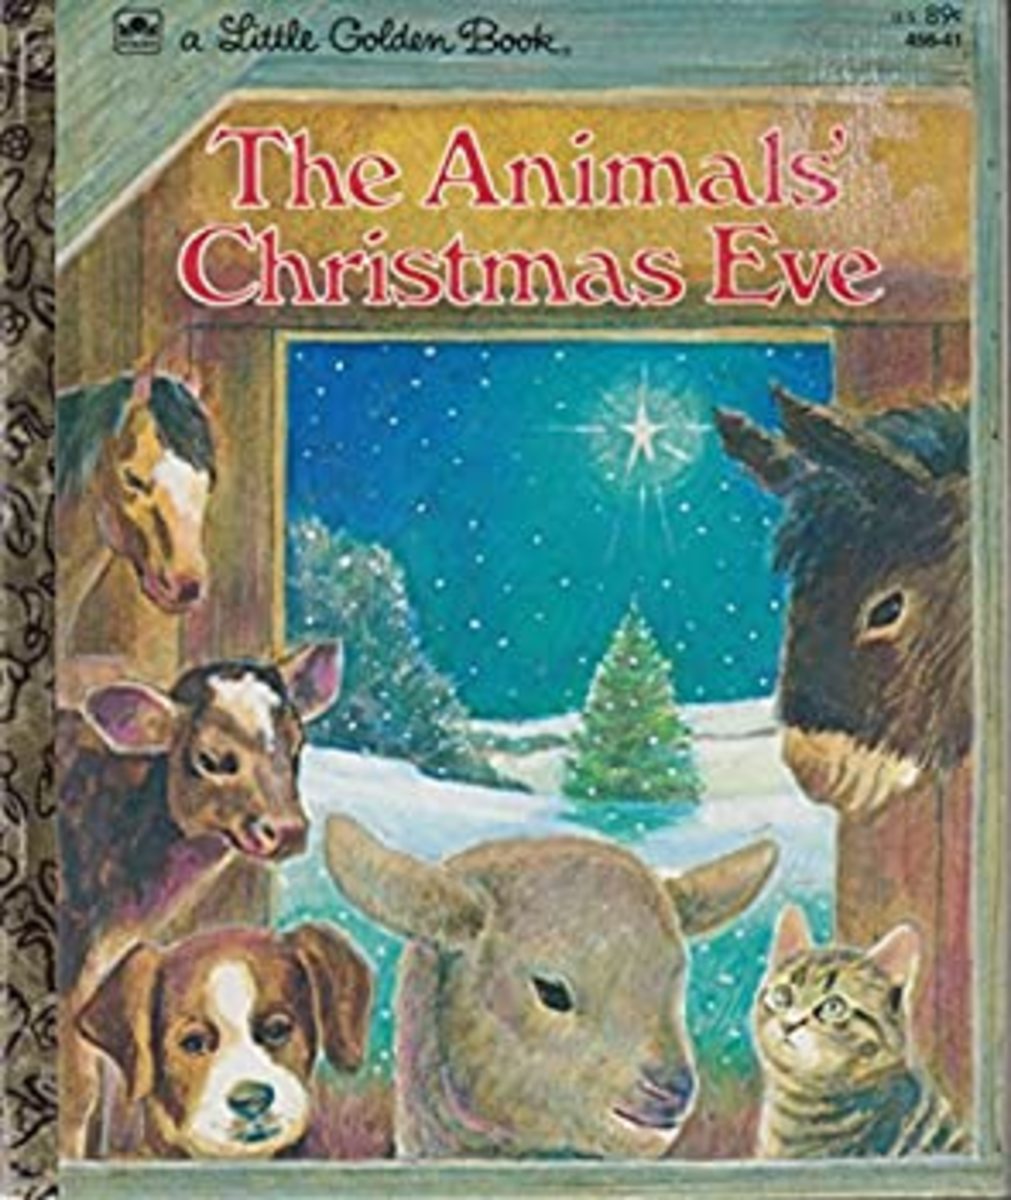 The enchanting tale of Christmas Eve in the barnyard.